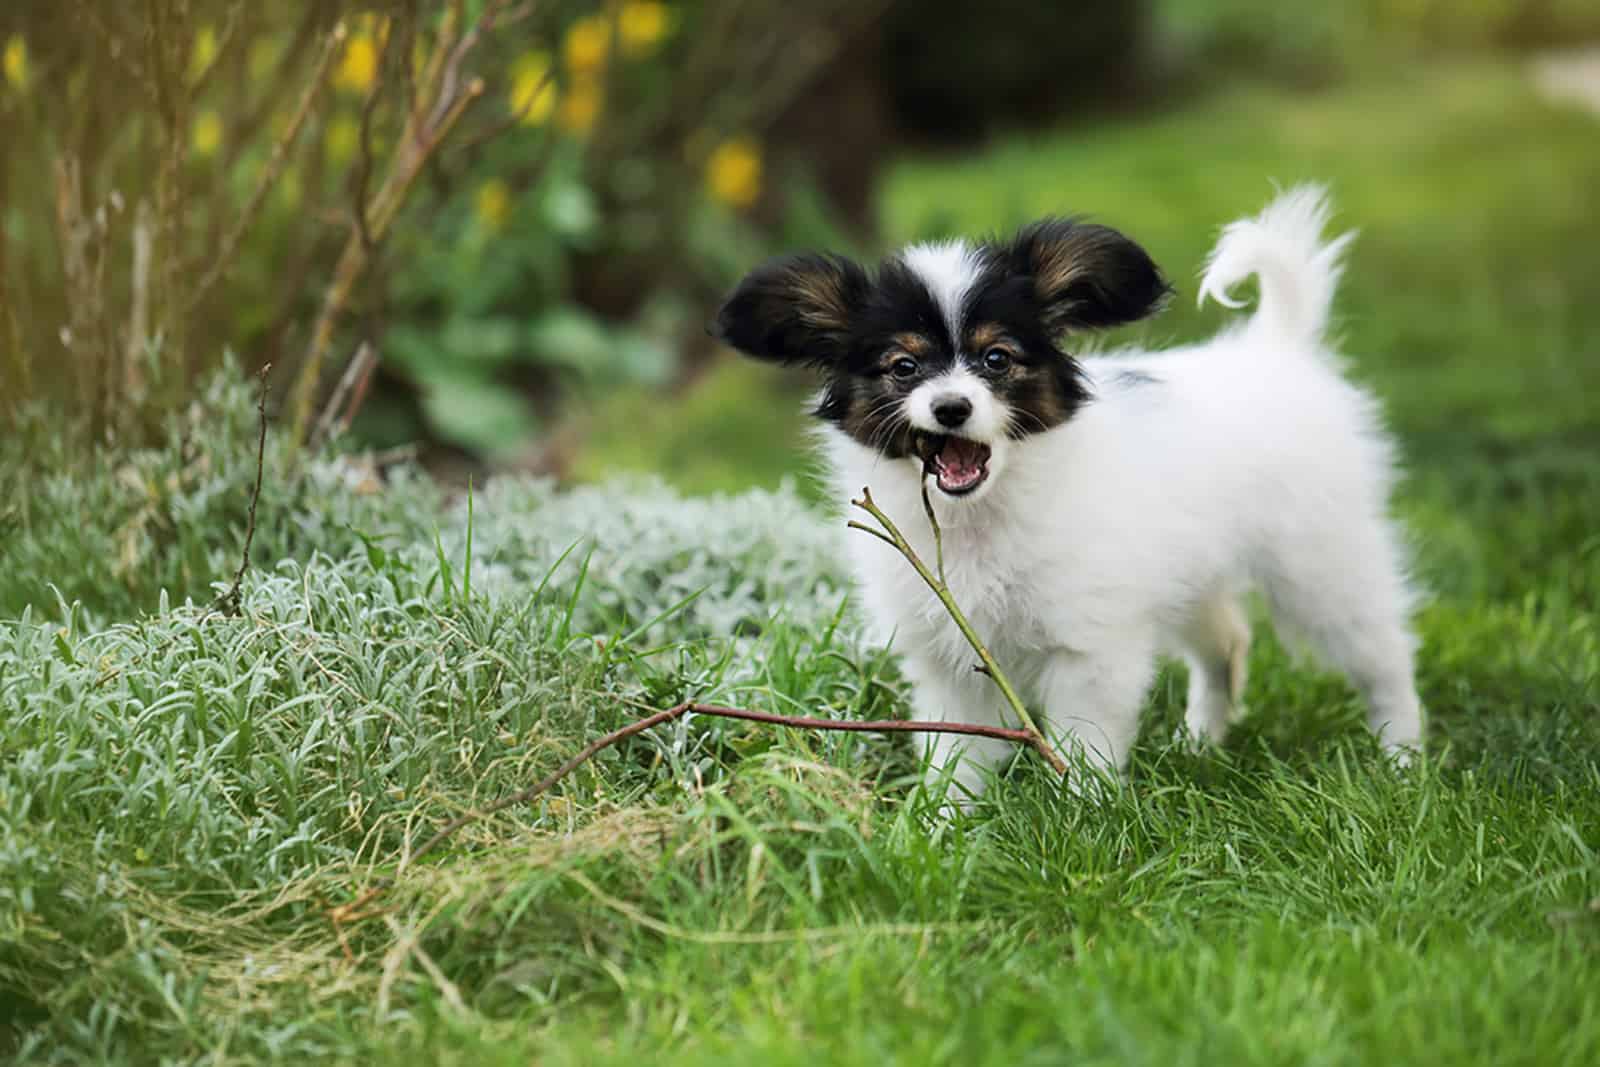 papillon puppy playing in the garden